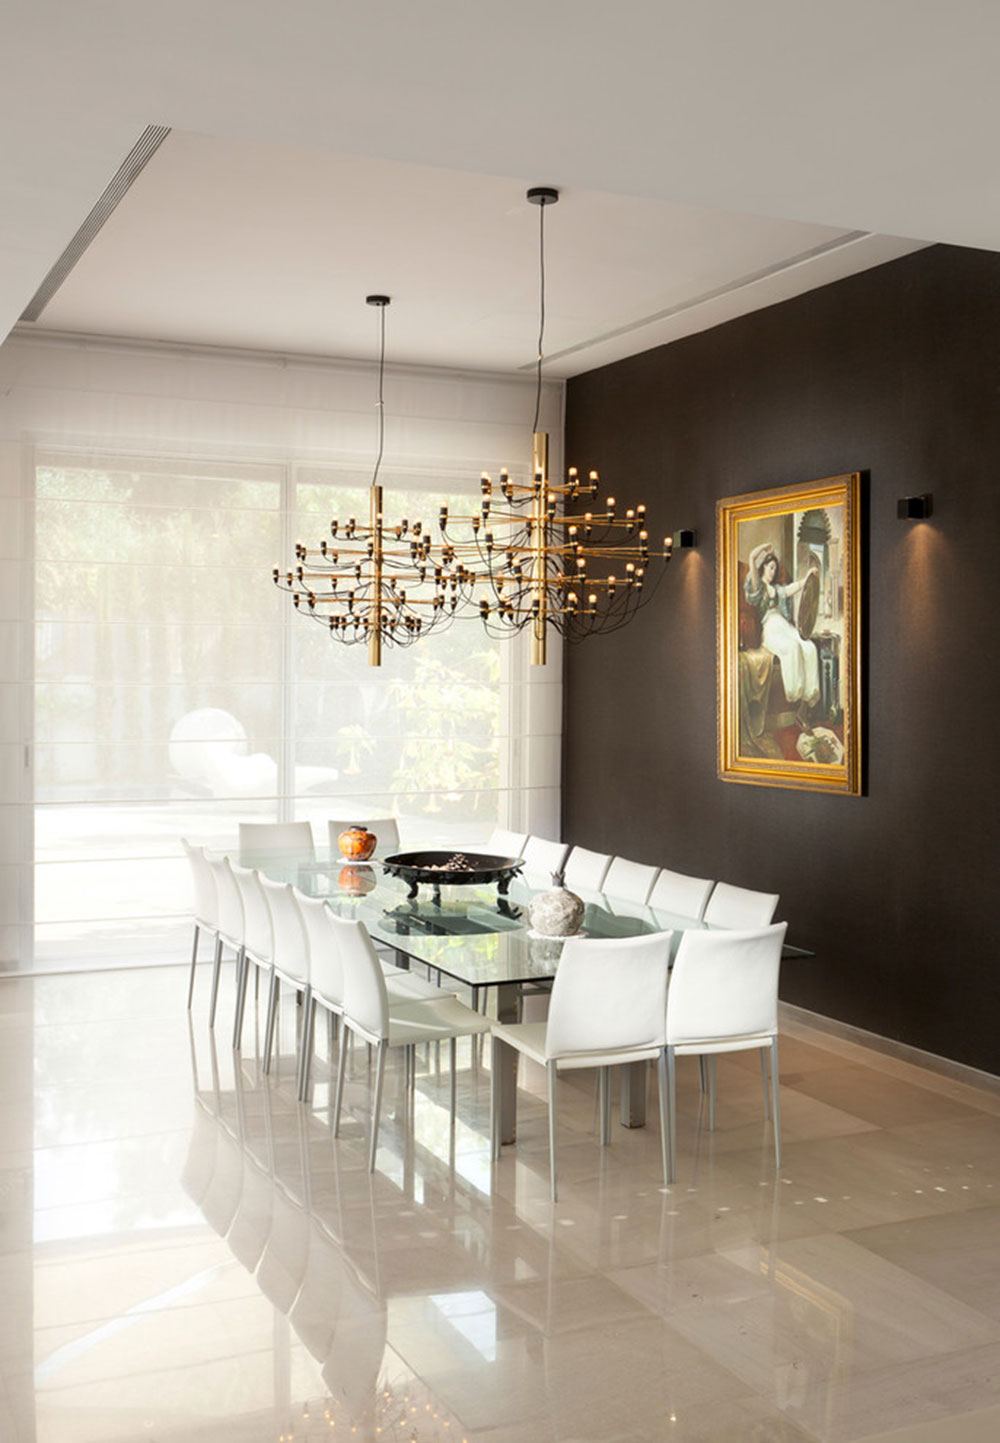 How-To-Choose-A-Chandelier-For-The-Dining-Room10 How To Choose A Chandelier For The Dining Room